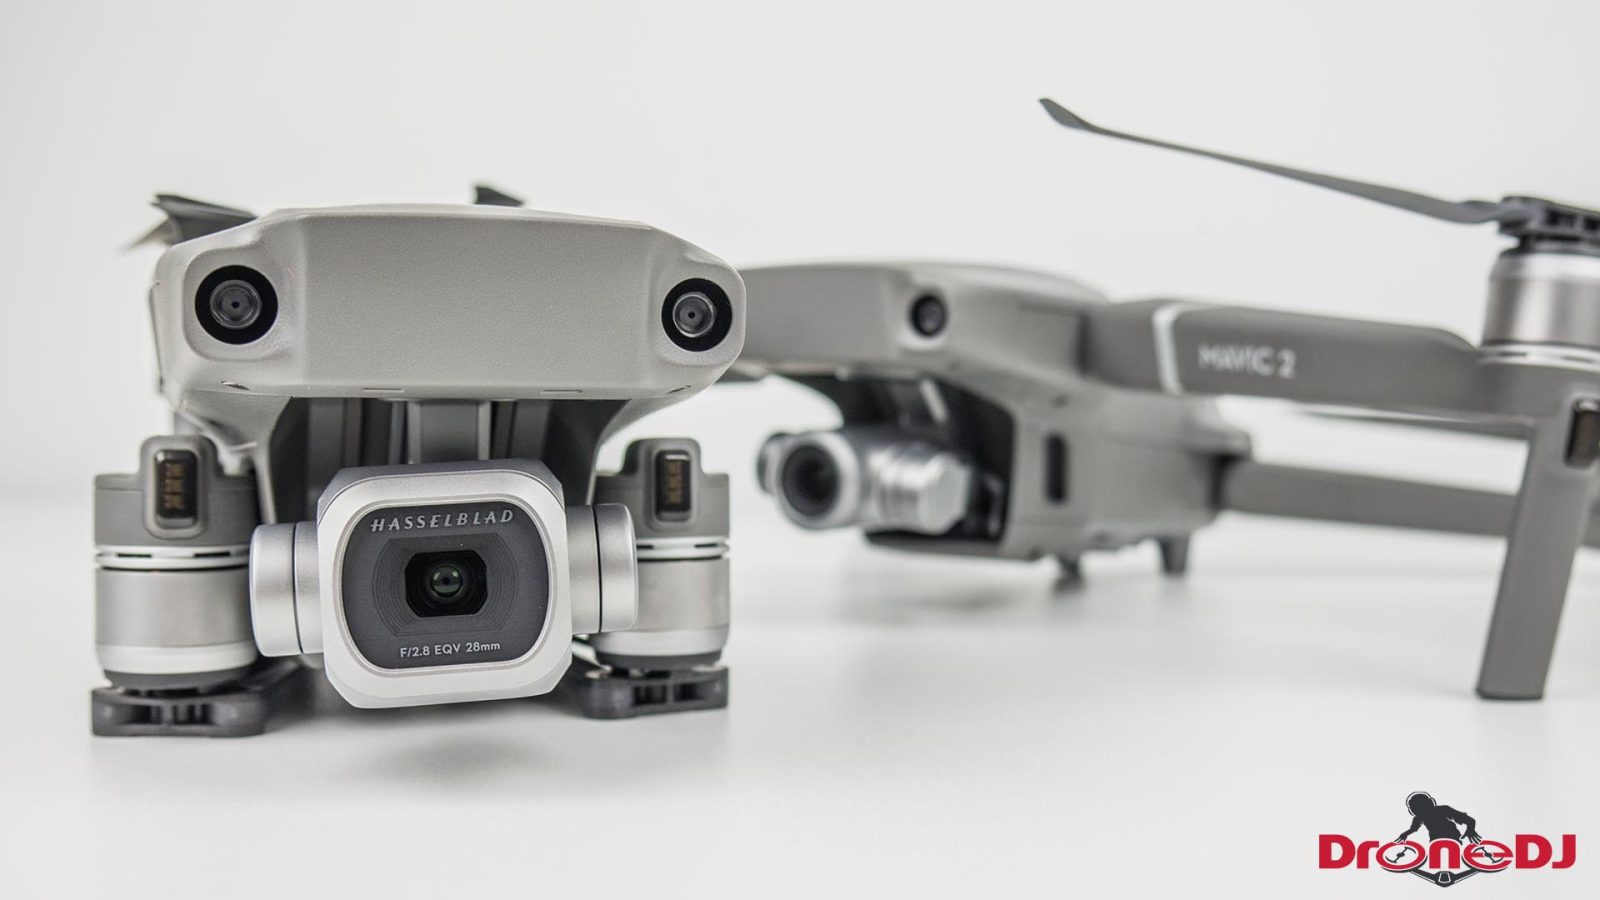 The DJI Mavic 2 Pro & Zoom have a secret camera trick up their sleeve